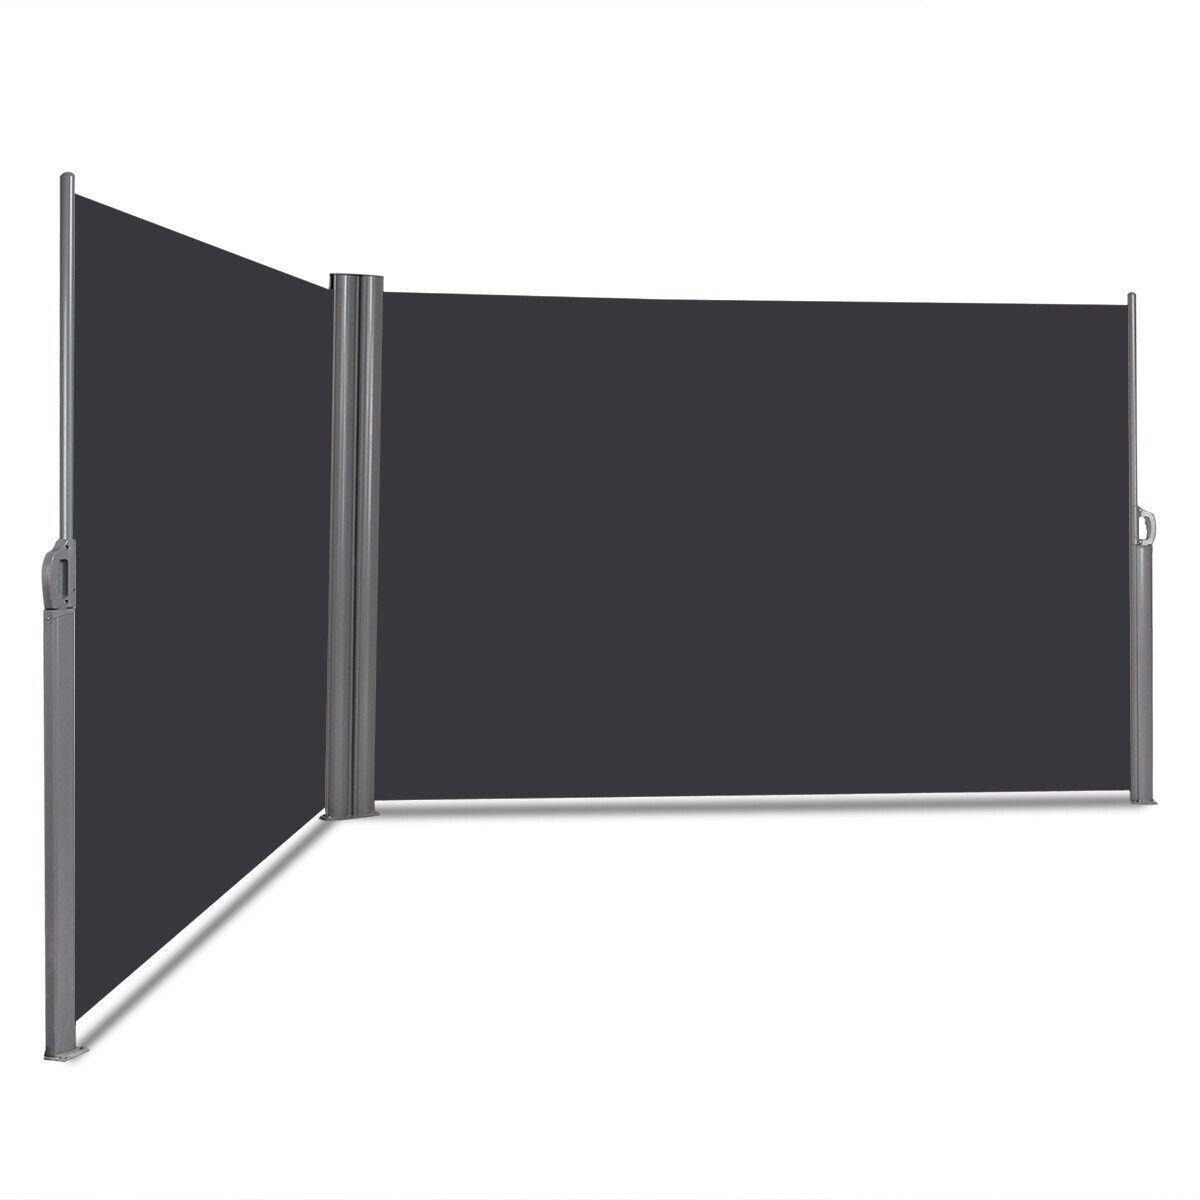 (1.6x6M) Retractable Folding Side Awning Screen Garden Privacy Divider - image 1